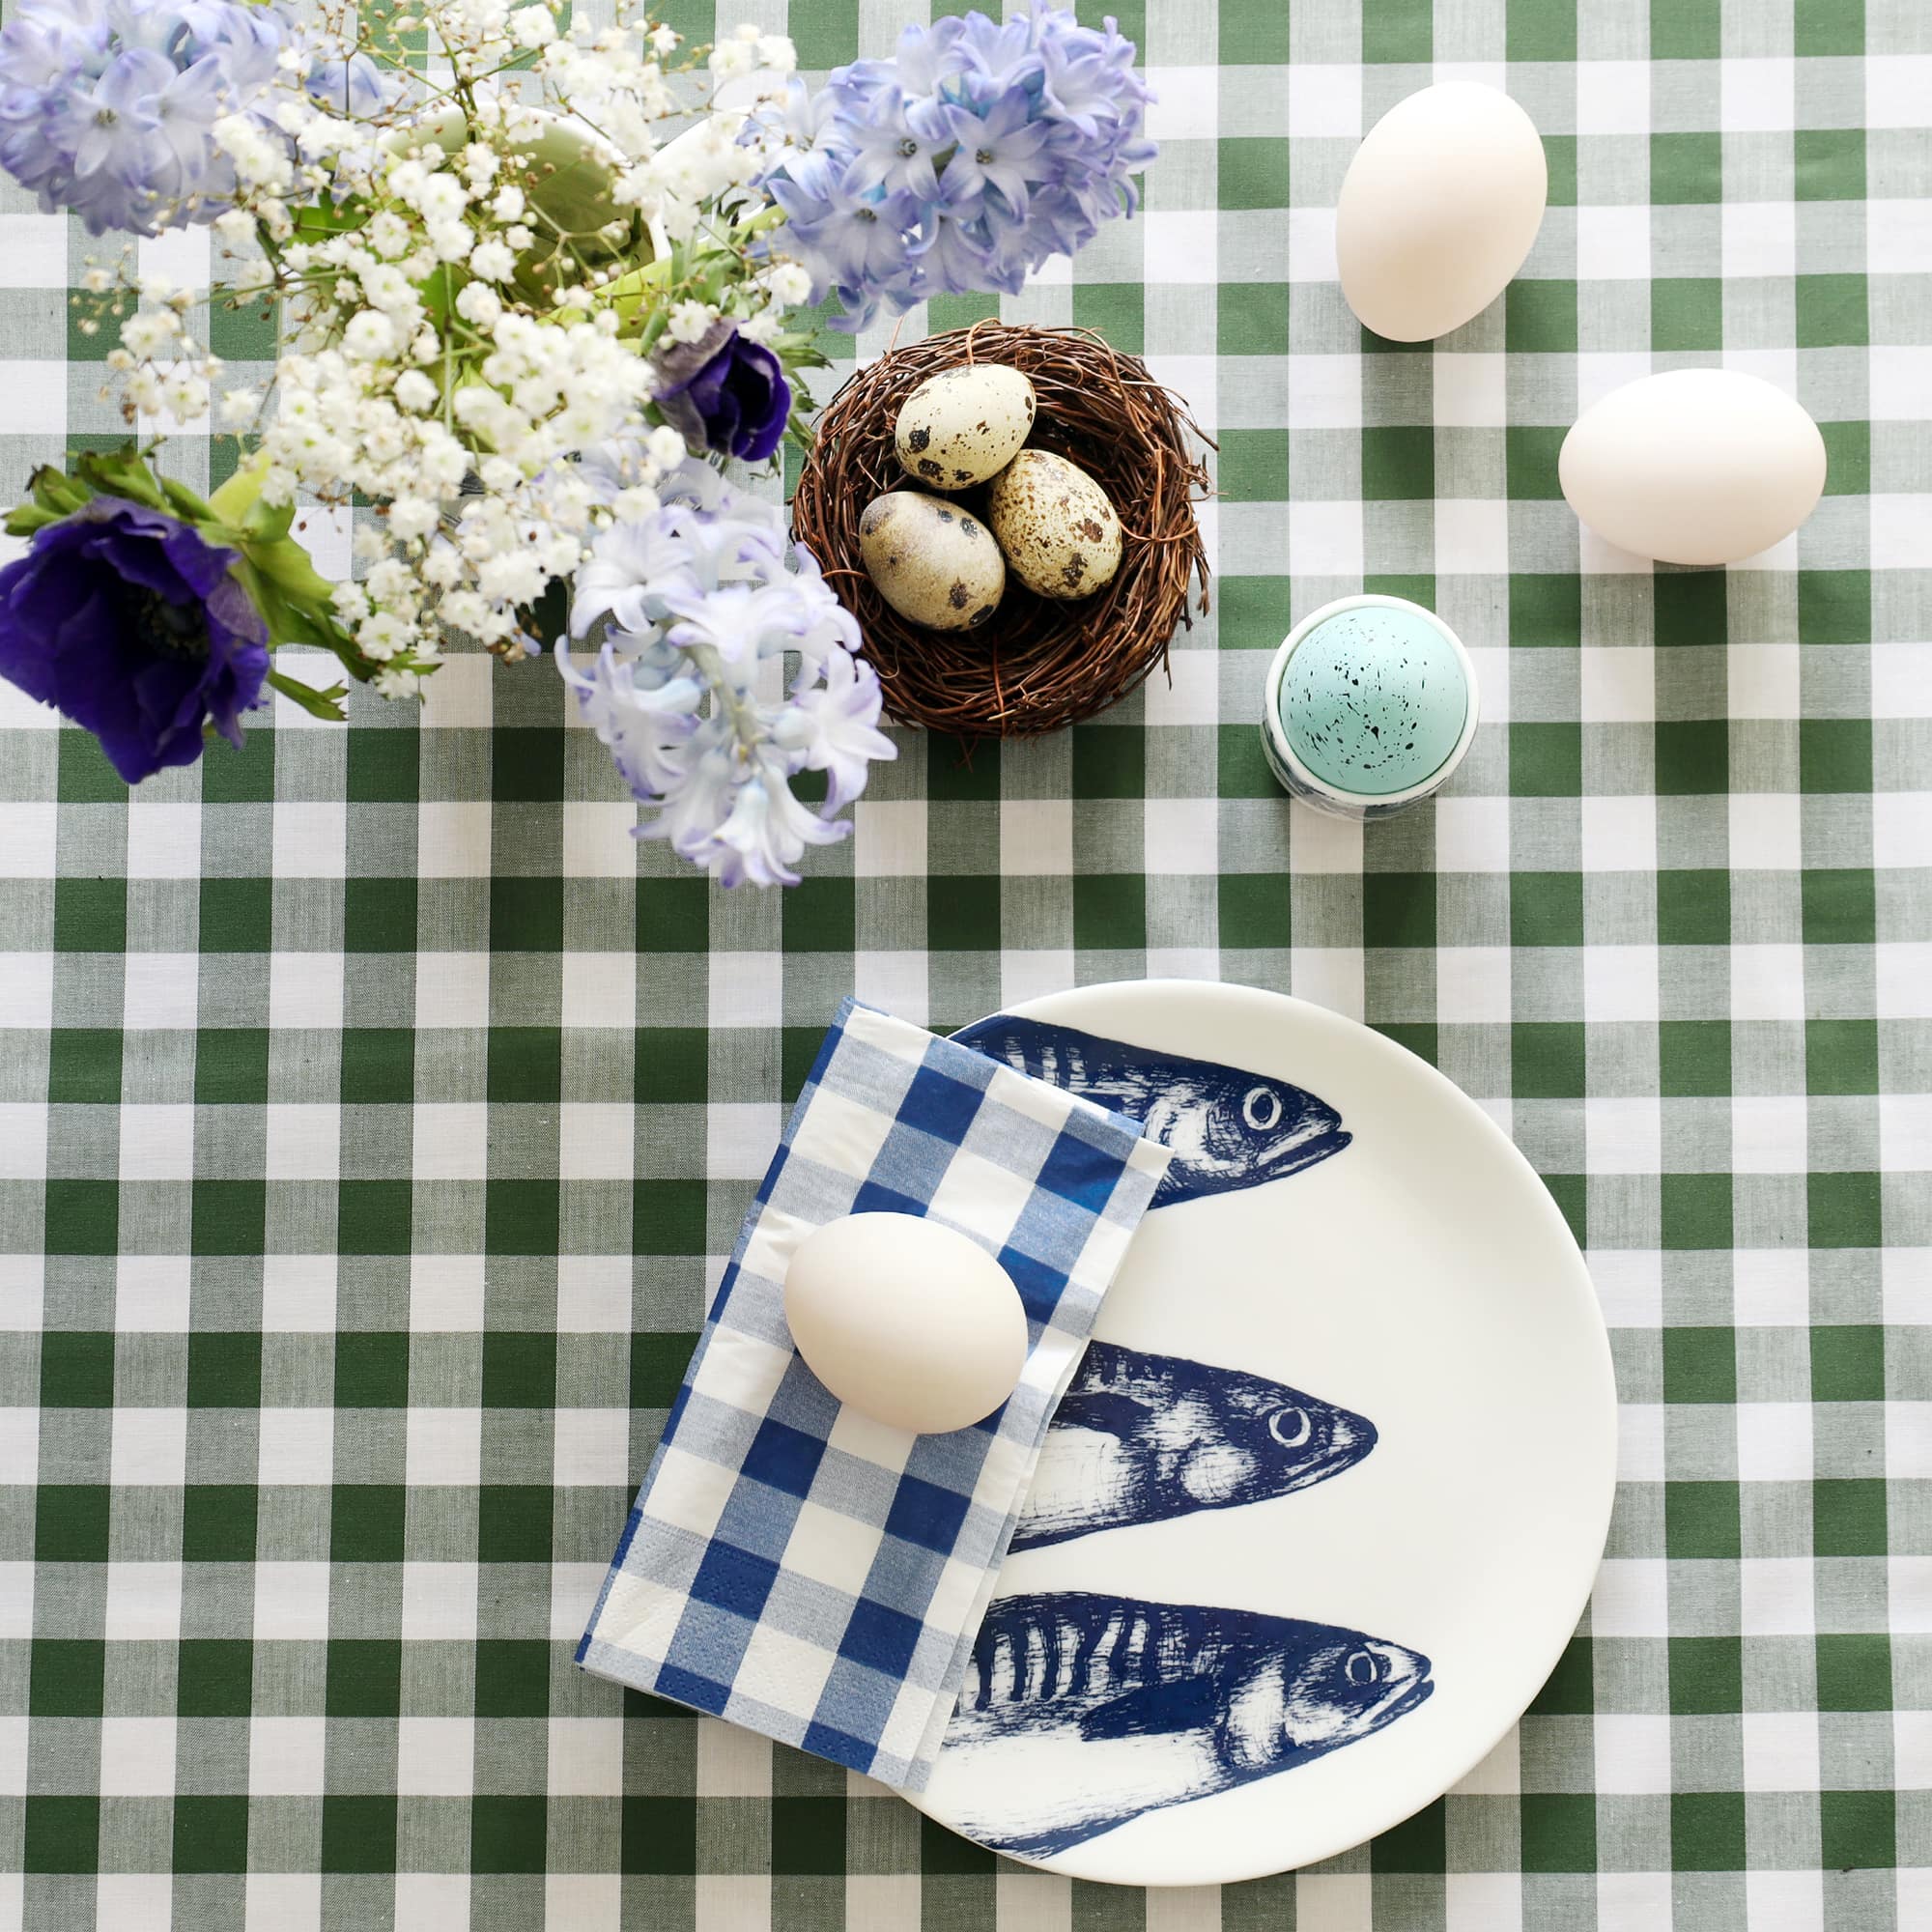 White bone china plate with 3 mackerel heads illustration in navy on it. There is a folded blue gingham napkin on the plate with a duck egg. The table is laid in a green gingham tablecloth and there are more eggs, a small nest with quails eggs and a jug with hyacinths and anemones in.